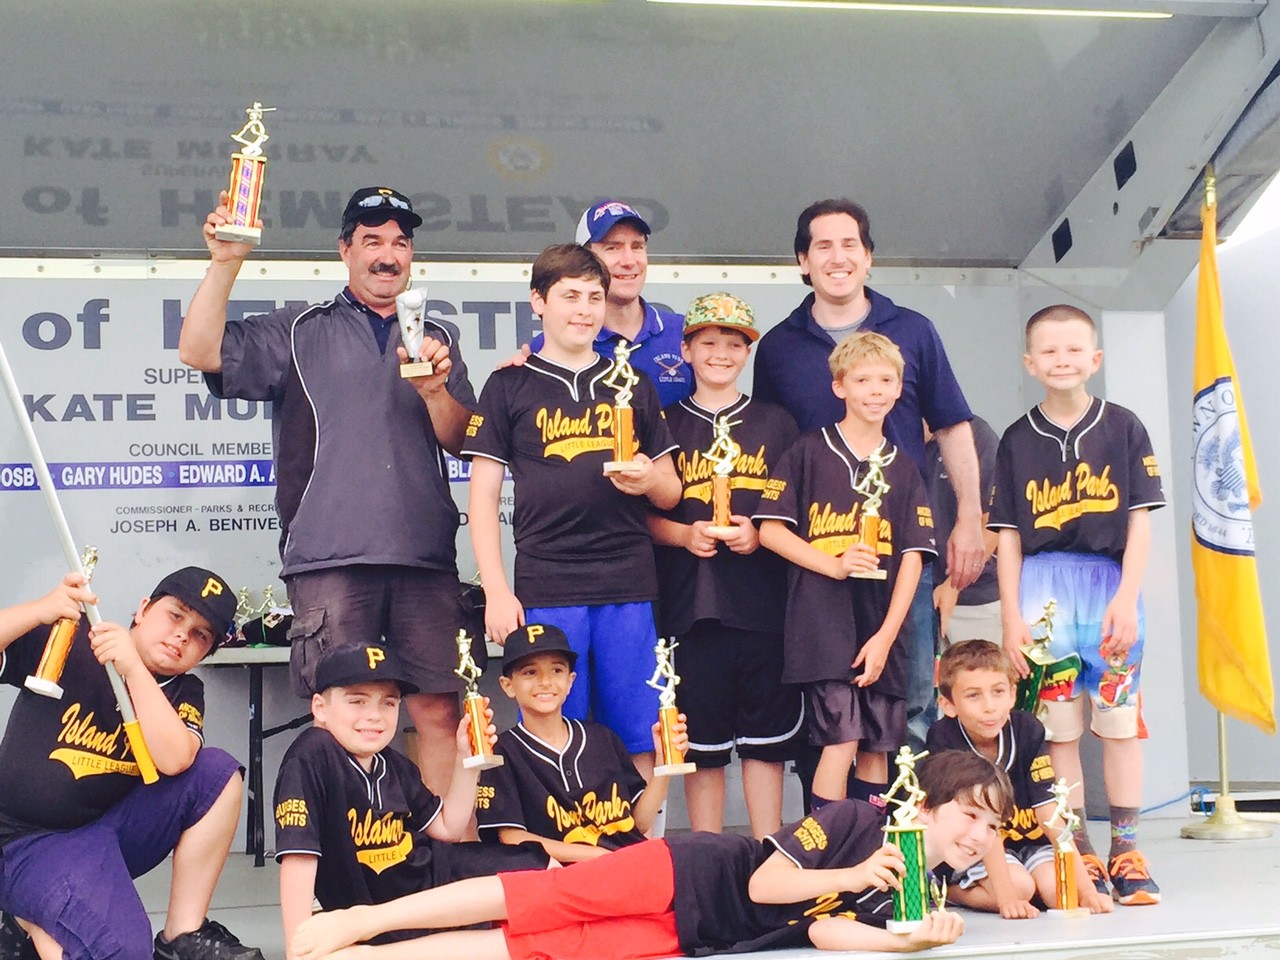 The Island Park Pirates, the team came within one game of winning the Championship.